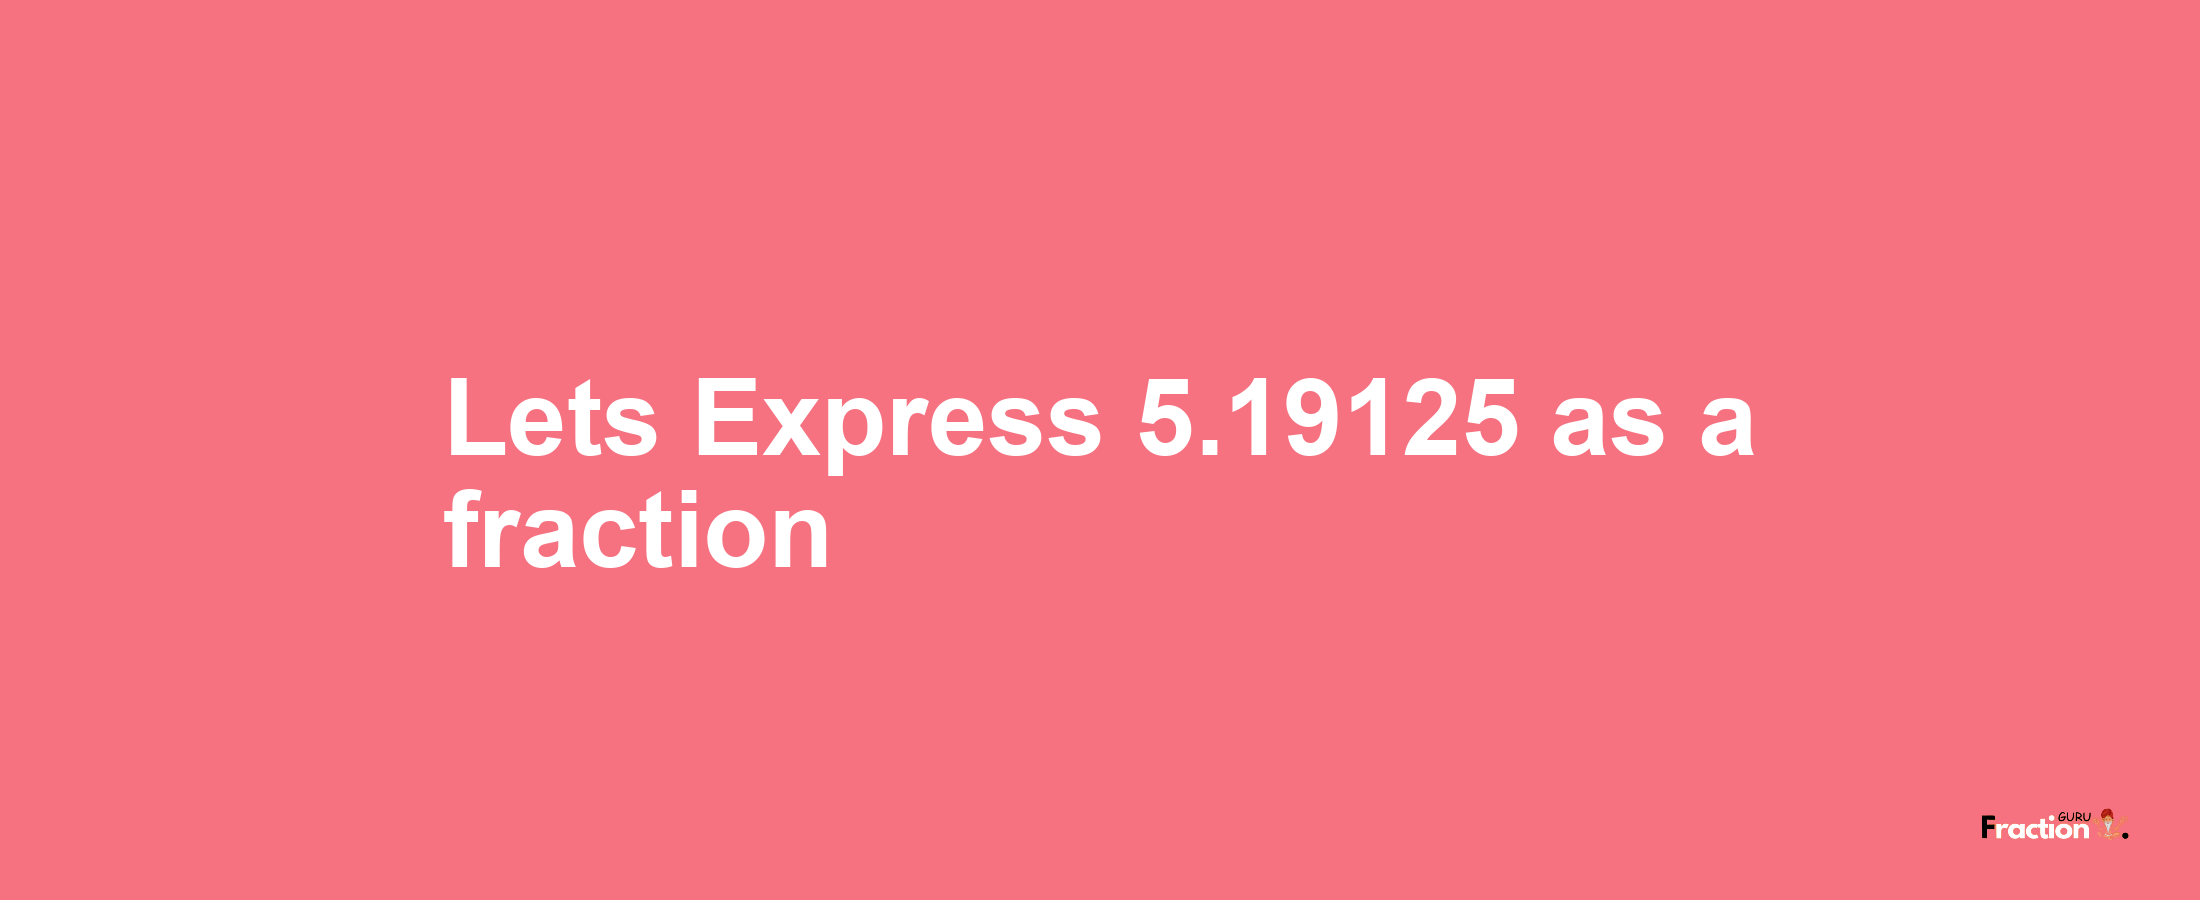 Lets Express 5.19125 as afraction